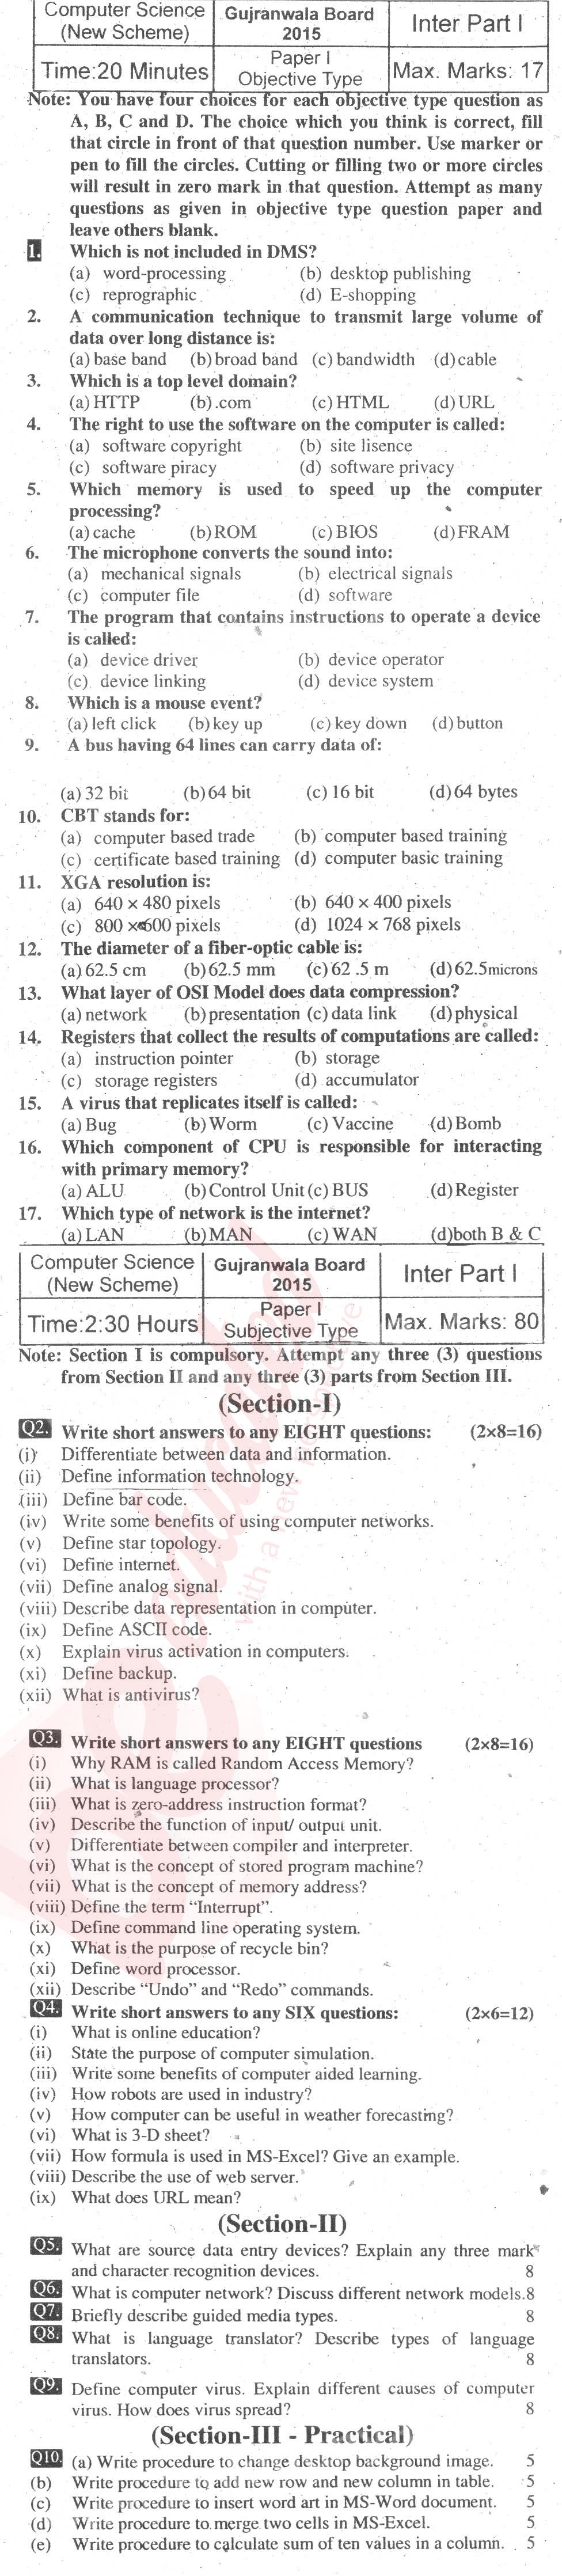 Computer Science ICS Part 1 Past Paper Group 1 BISE Gujranwala 2015